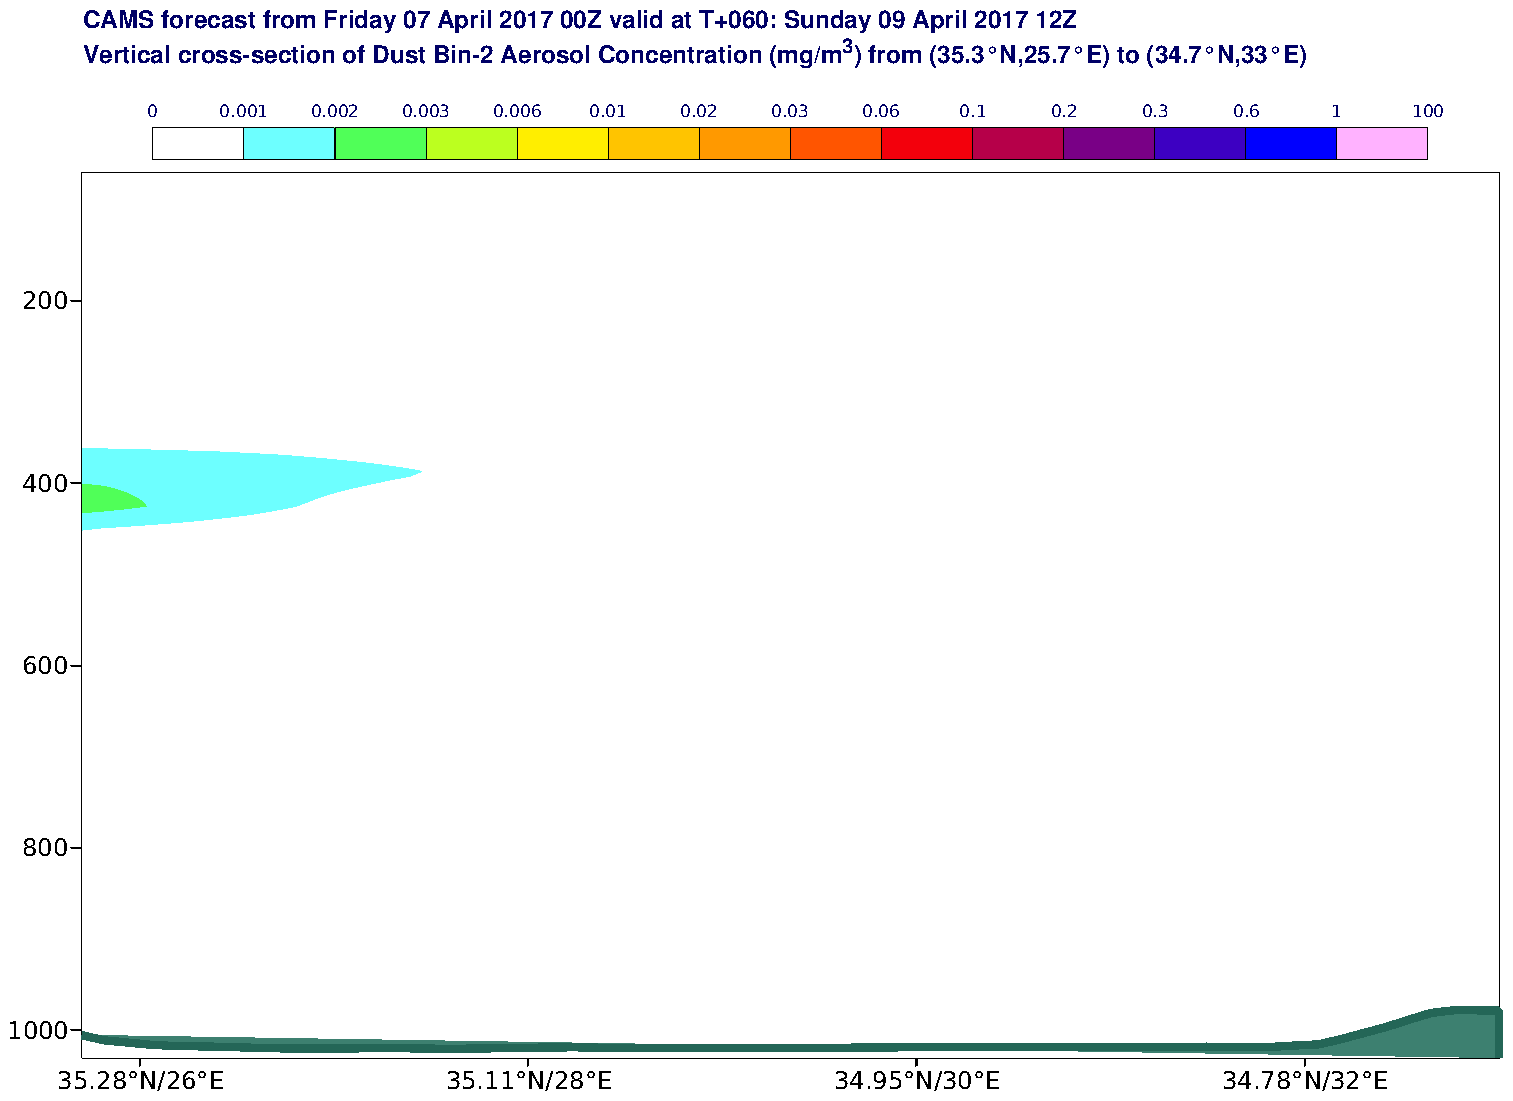 Vertical cross-section of Dust Bin-2 Aerosol Concentration (mg/m3) valid at T60 - 2017-04-09 12:00